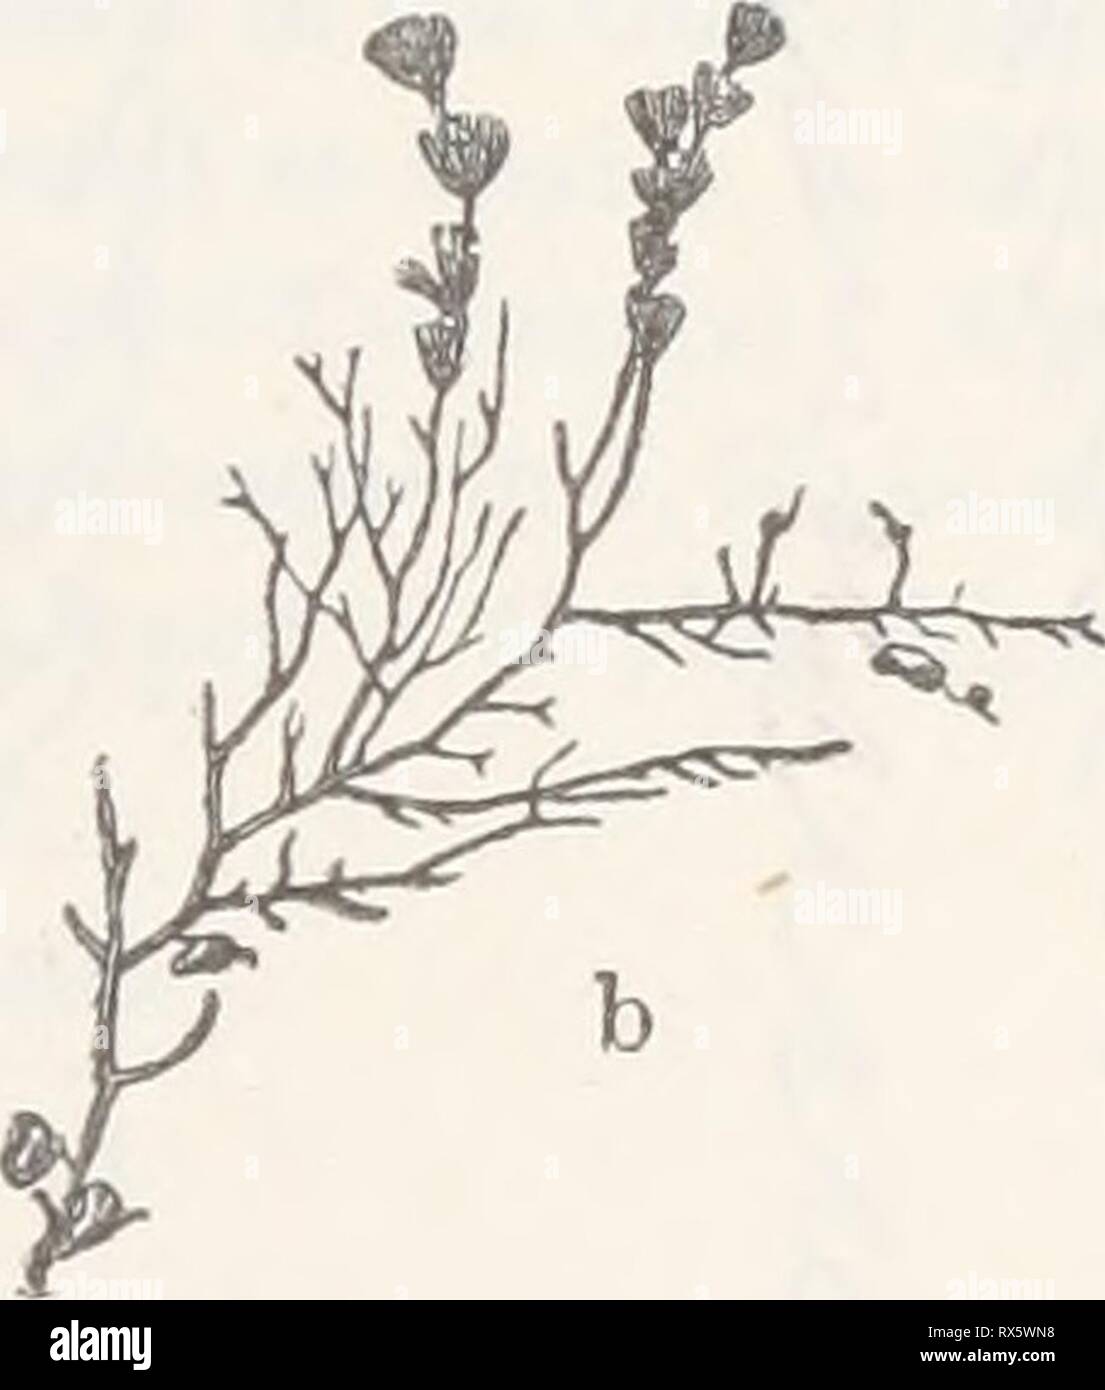 Ecological and systematic studies of Ecological and systematic studies of the Ceylon species of Caulerpa ecologicalsystem00unse Year: 1906  Fig. 1.—C. verticillata, j. g. ag. (1 x 1). Periodicity.—^From notes taken by me it seems that C. verticillata at Galle reaches its highest development during the months from November to March, when it occurs in masses at the mouth of the river. On visiting the identical spot in August of the same year (1903) it was scantier, but Ceramia and other Florideae were more abundant. The specimens of this plant collected by Prof. Kjellman (WiTTROCK &; NoRDSTBDT,  Stock Photo